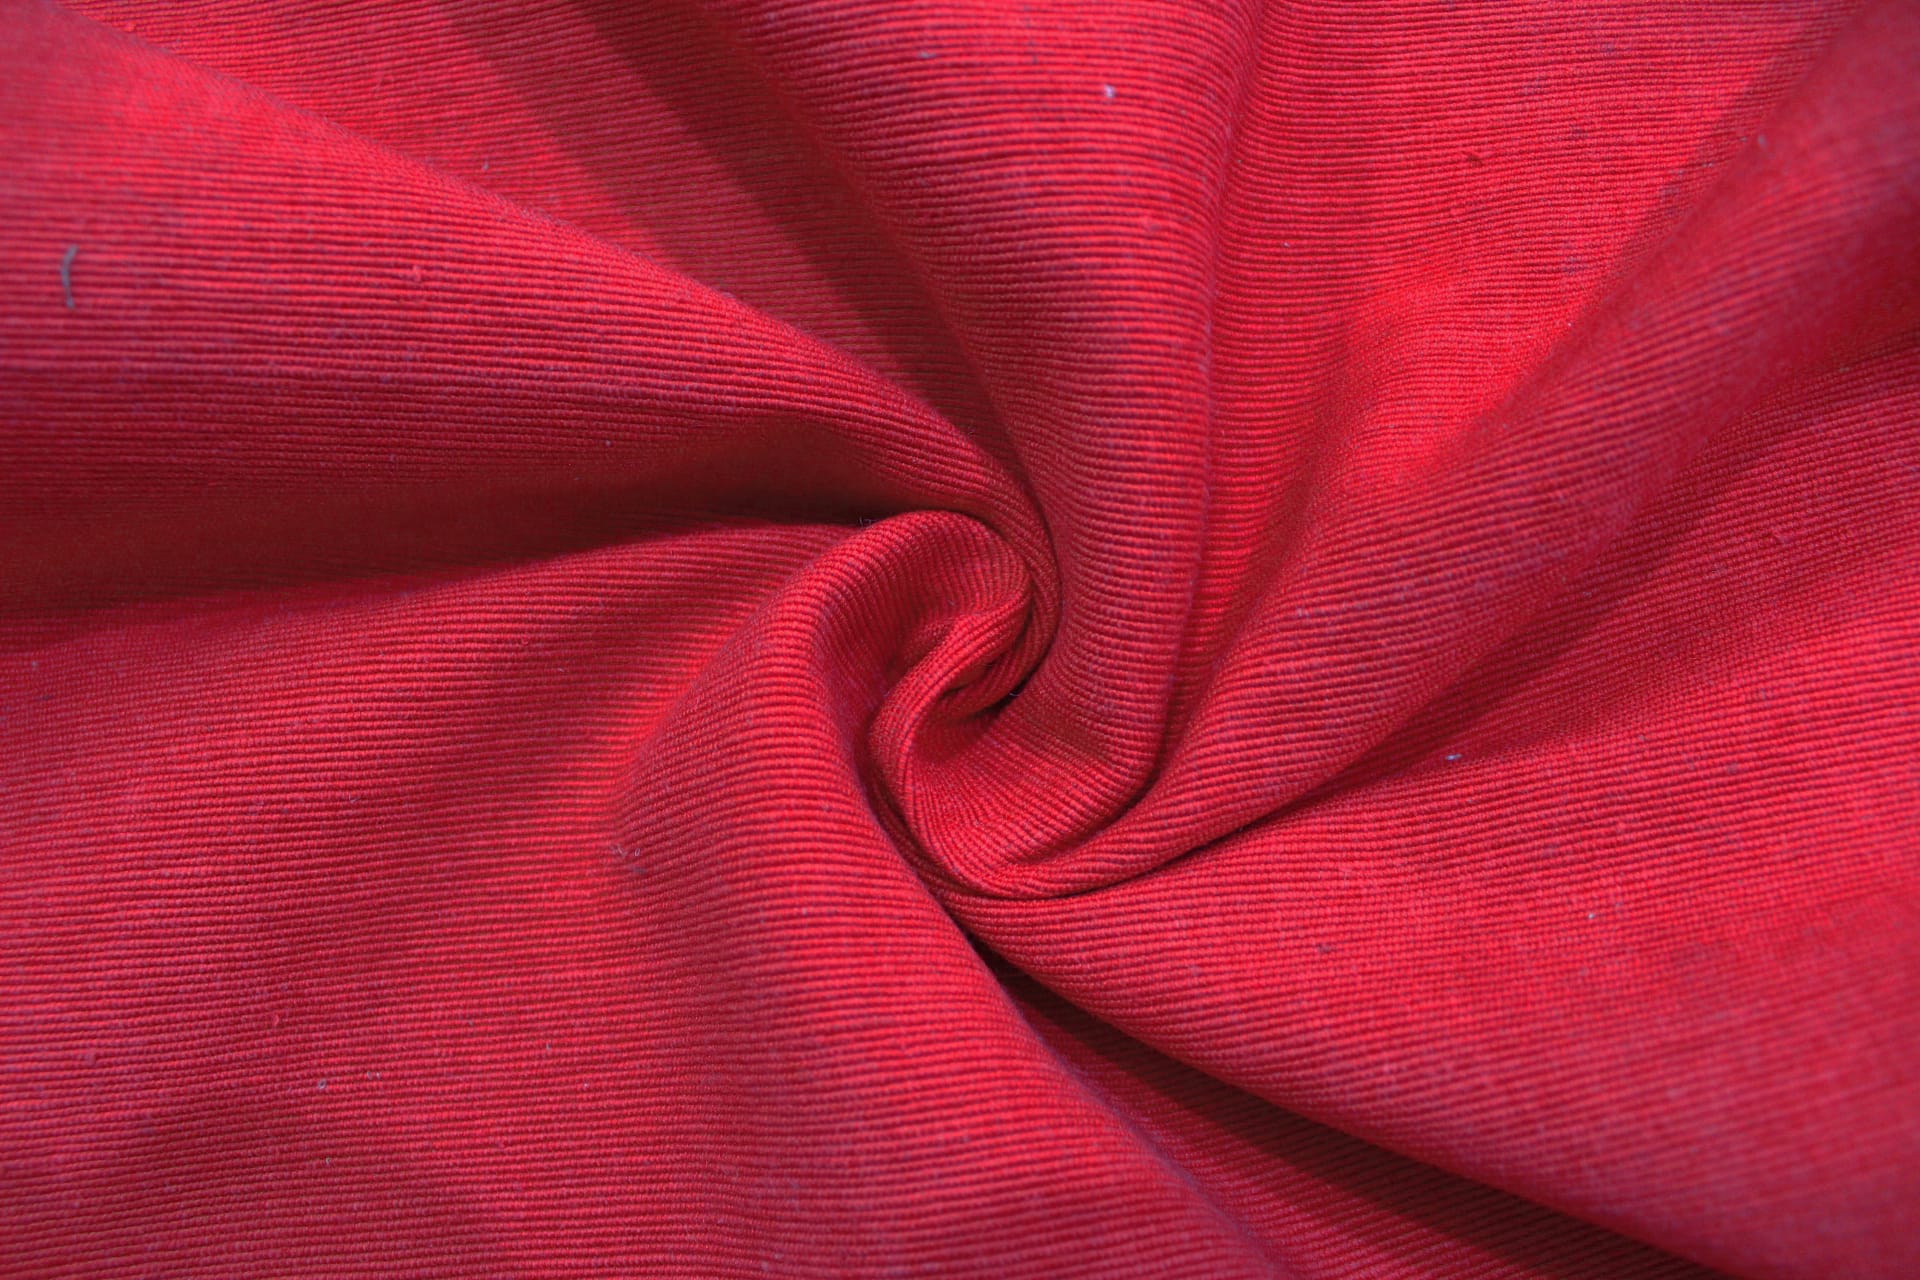 Red Handloom Corded Weave 330 GSM Plain Cotton Fabric (122 cms) online in India